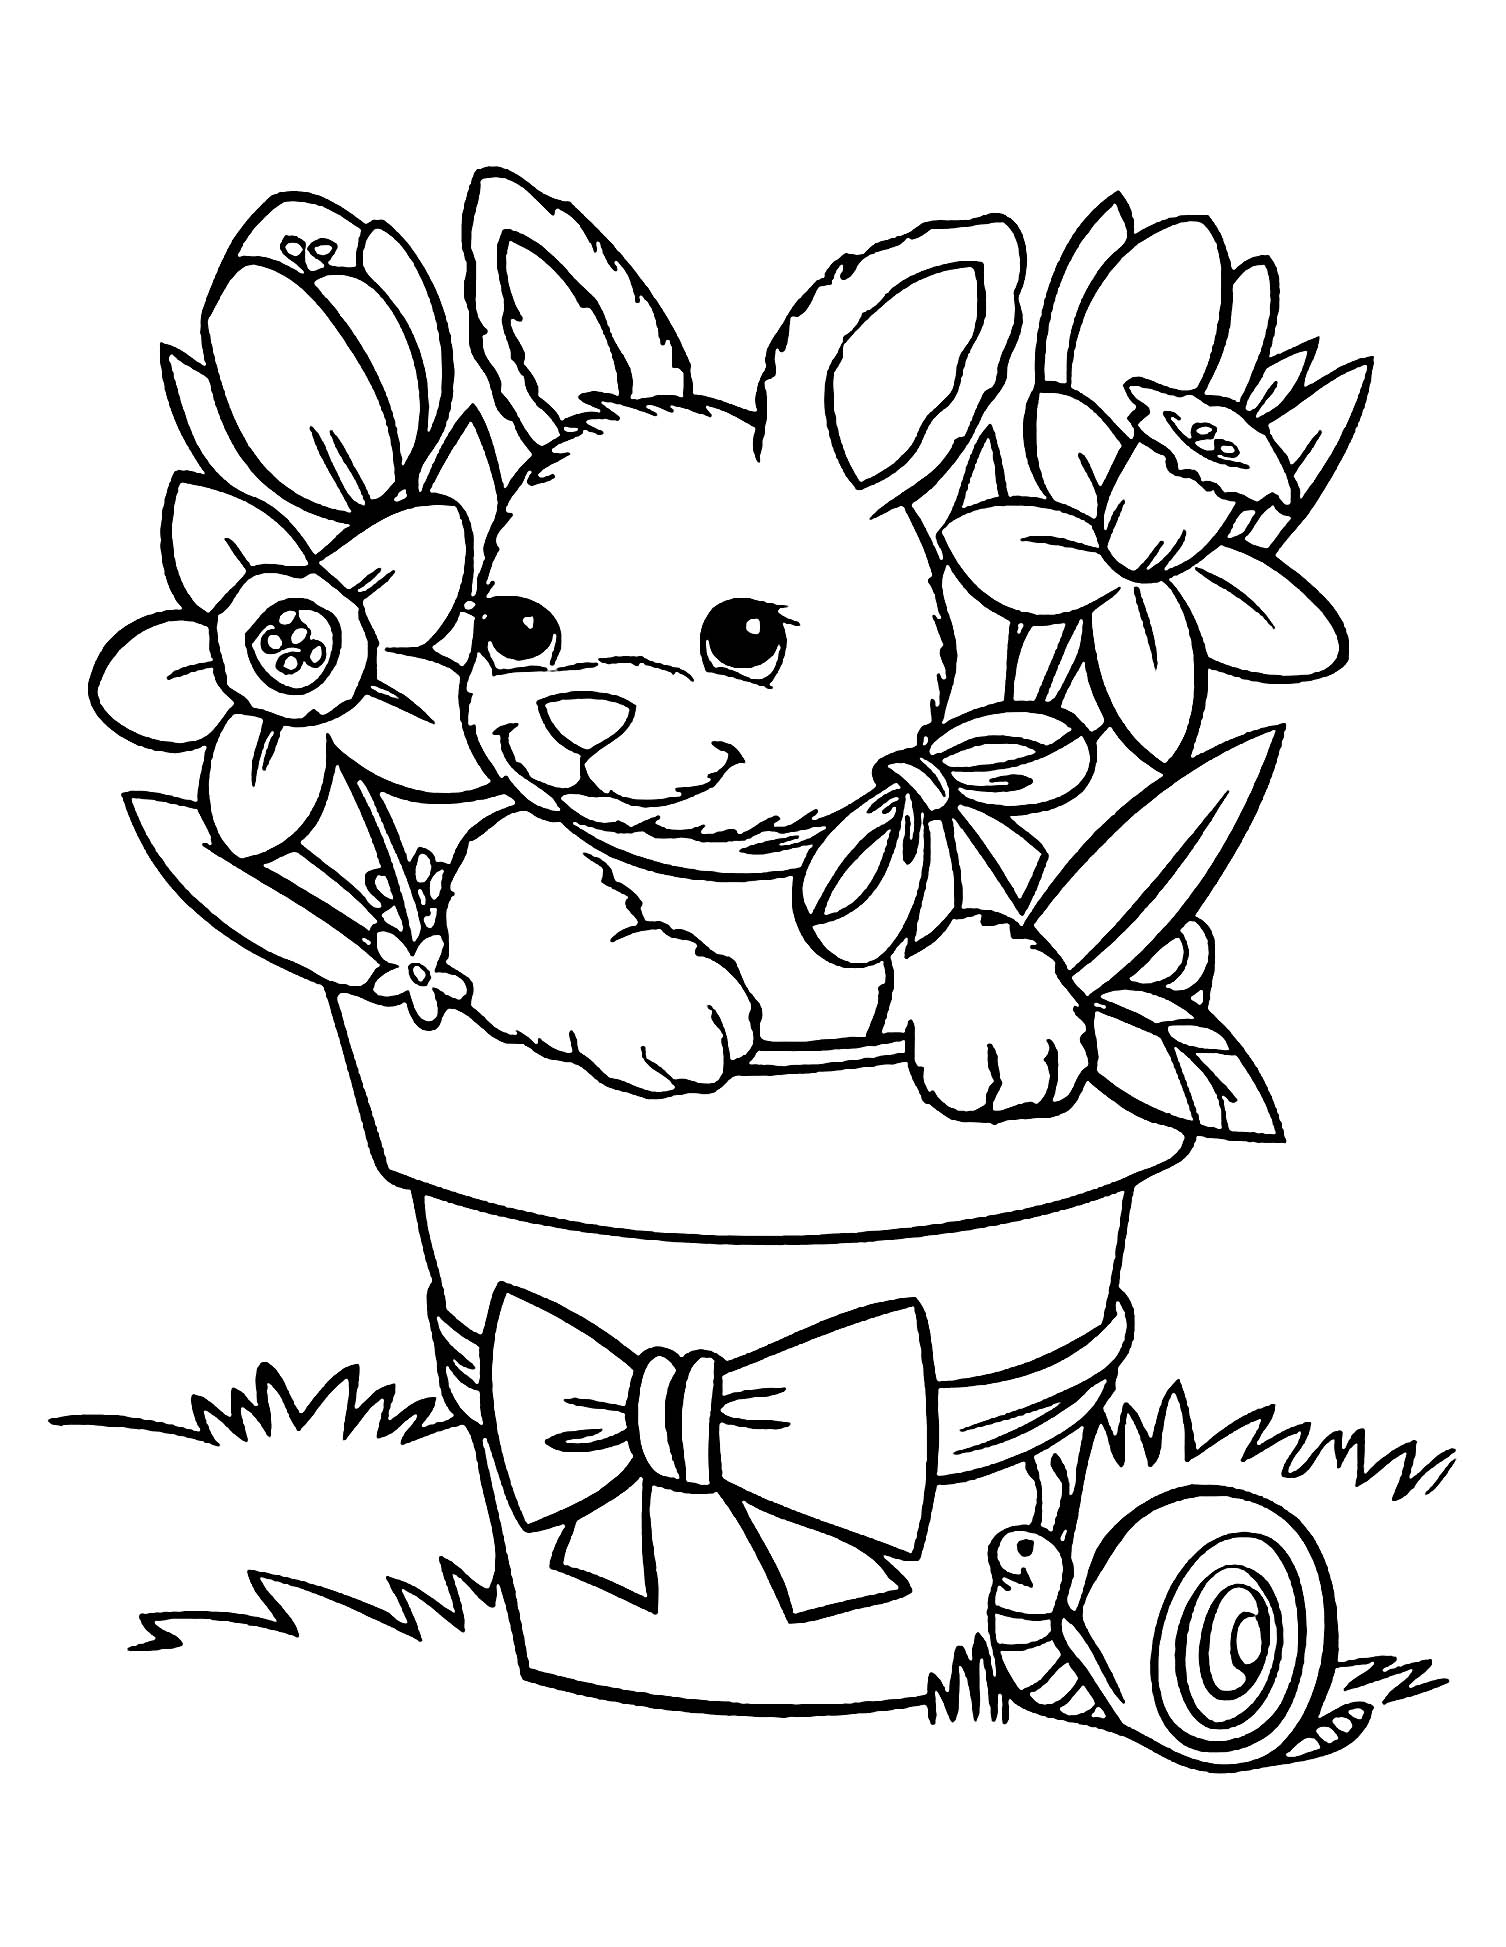 Rabbit coloring pages for kids Rabbit Kids Coloring Pages